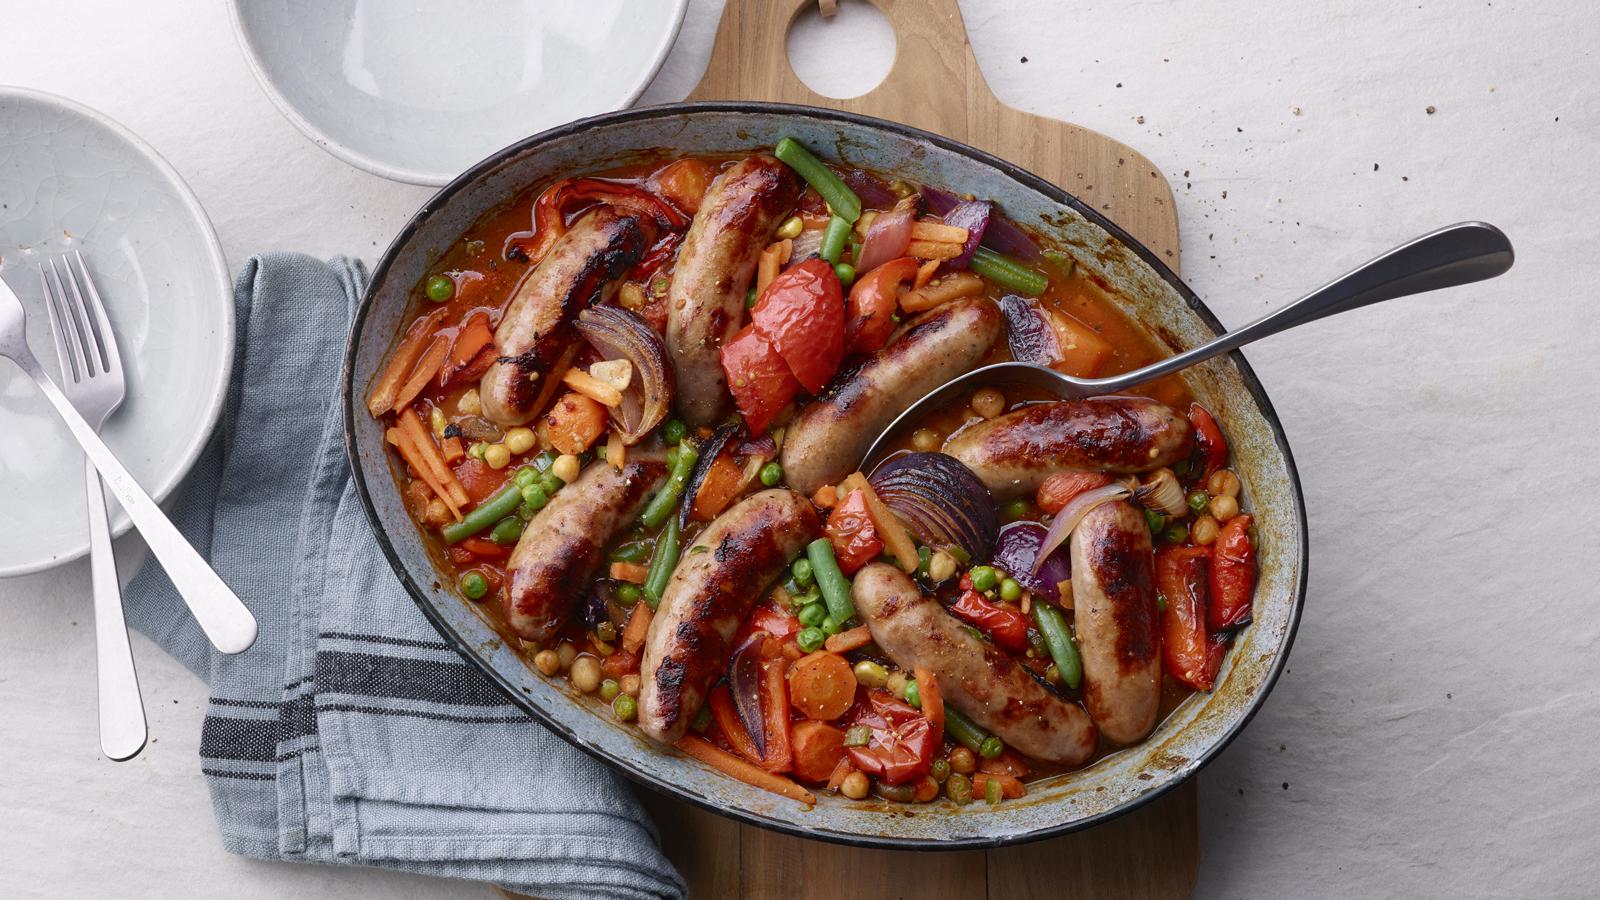 Hairy-bikers-sausage-casserole-recipe-Mary-Berry-tuscan-chicken